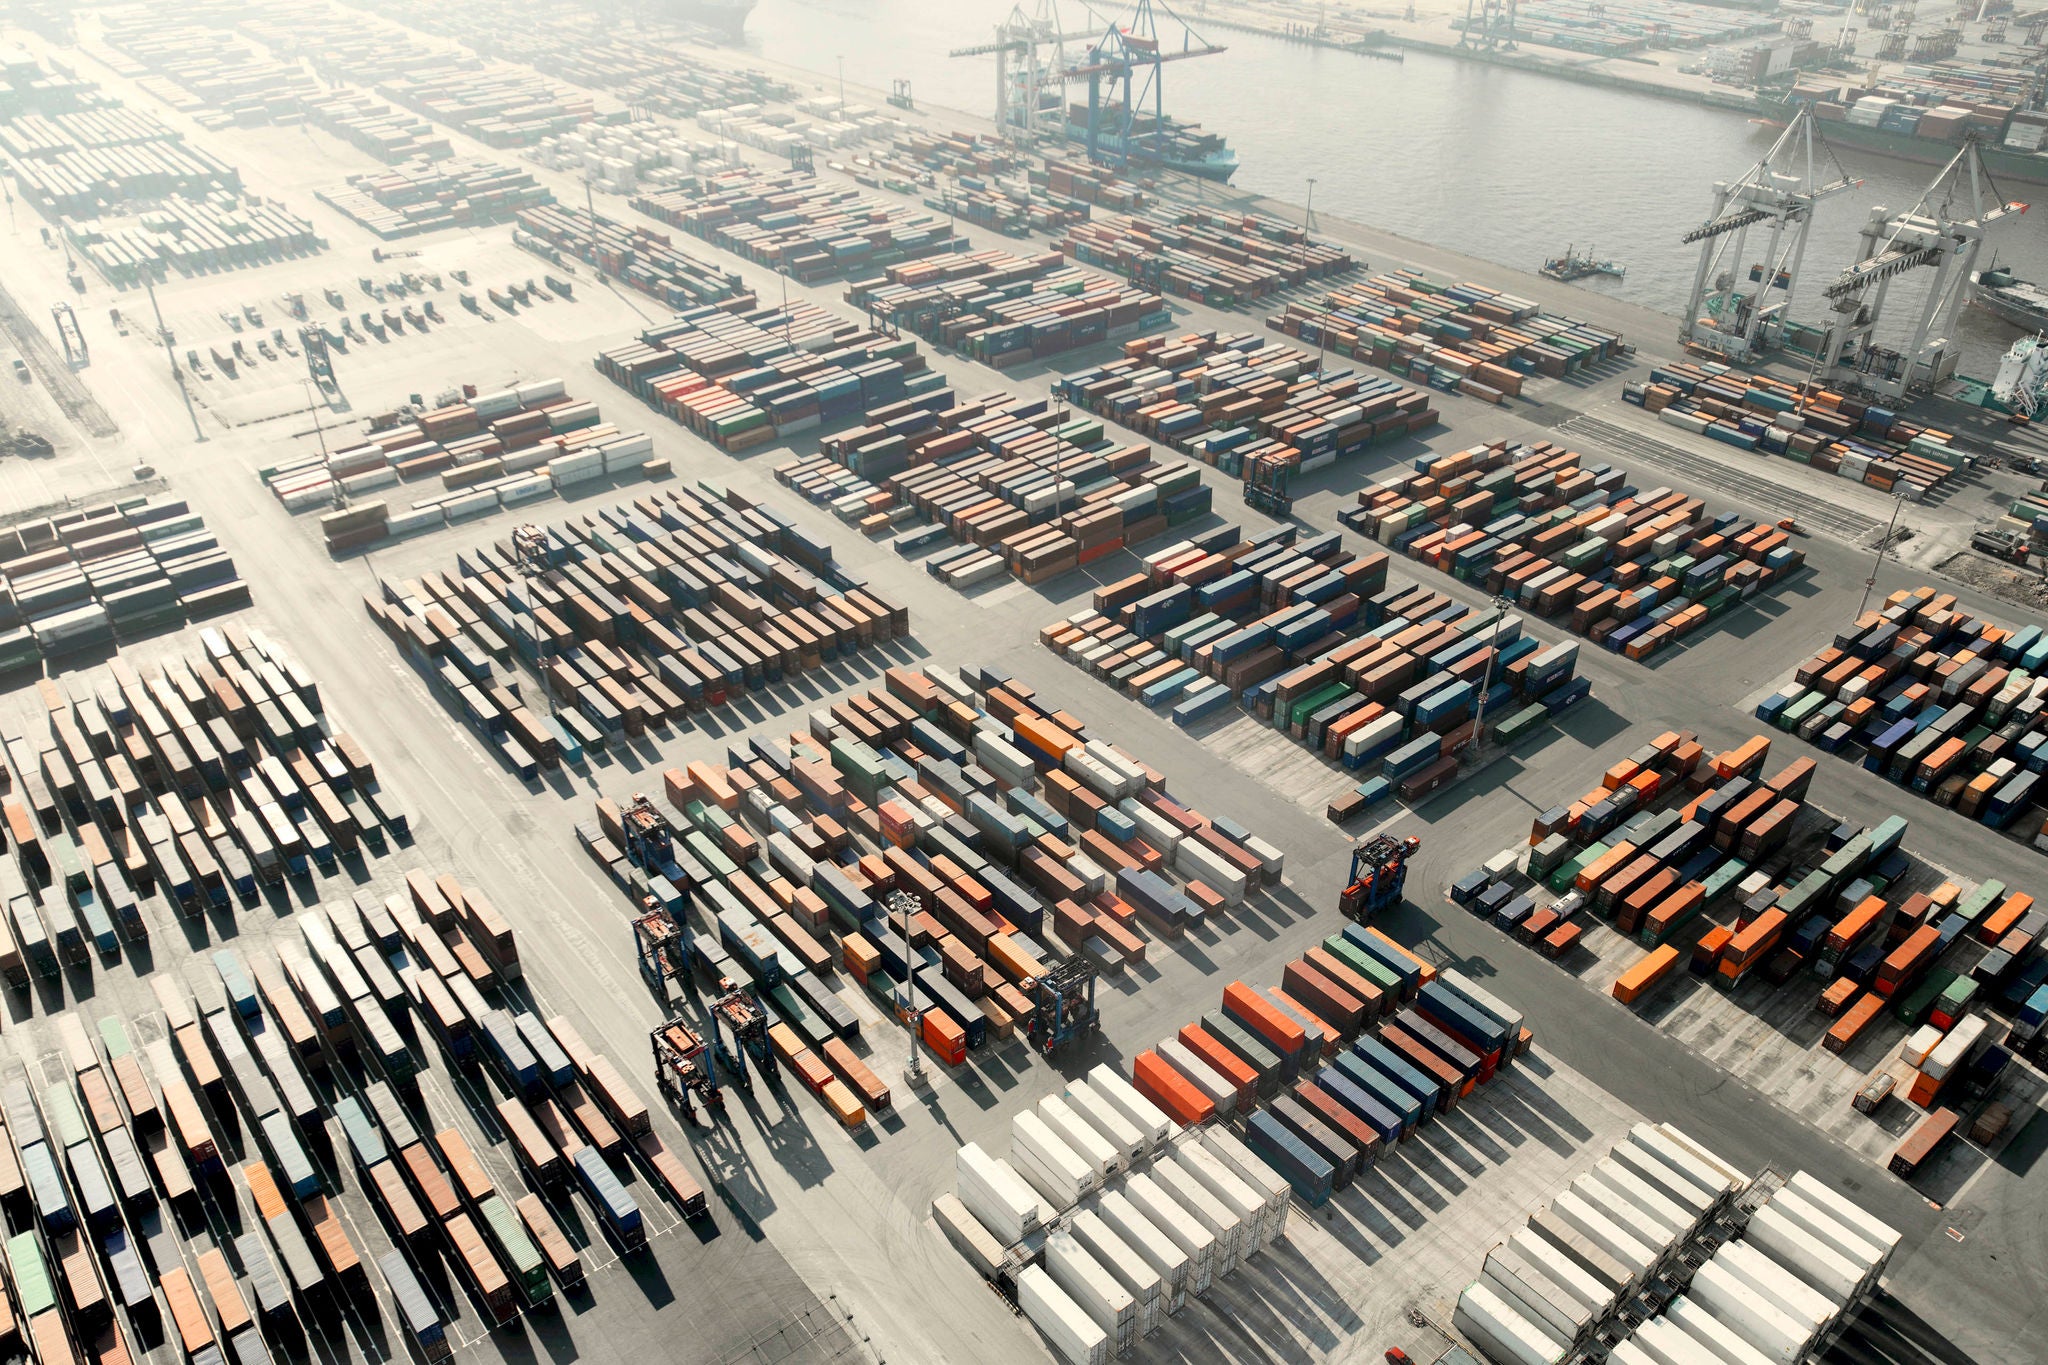 Freight containers on dock

Image downloaded by Charlie Brewer at 10:23 on the 16/05/19